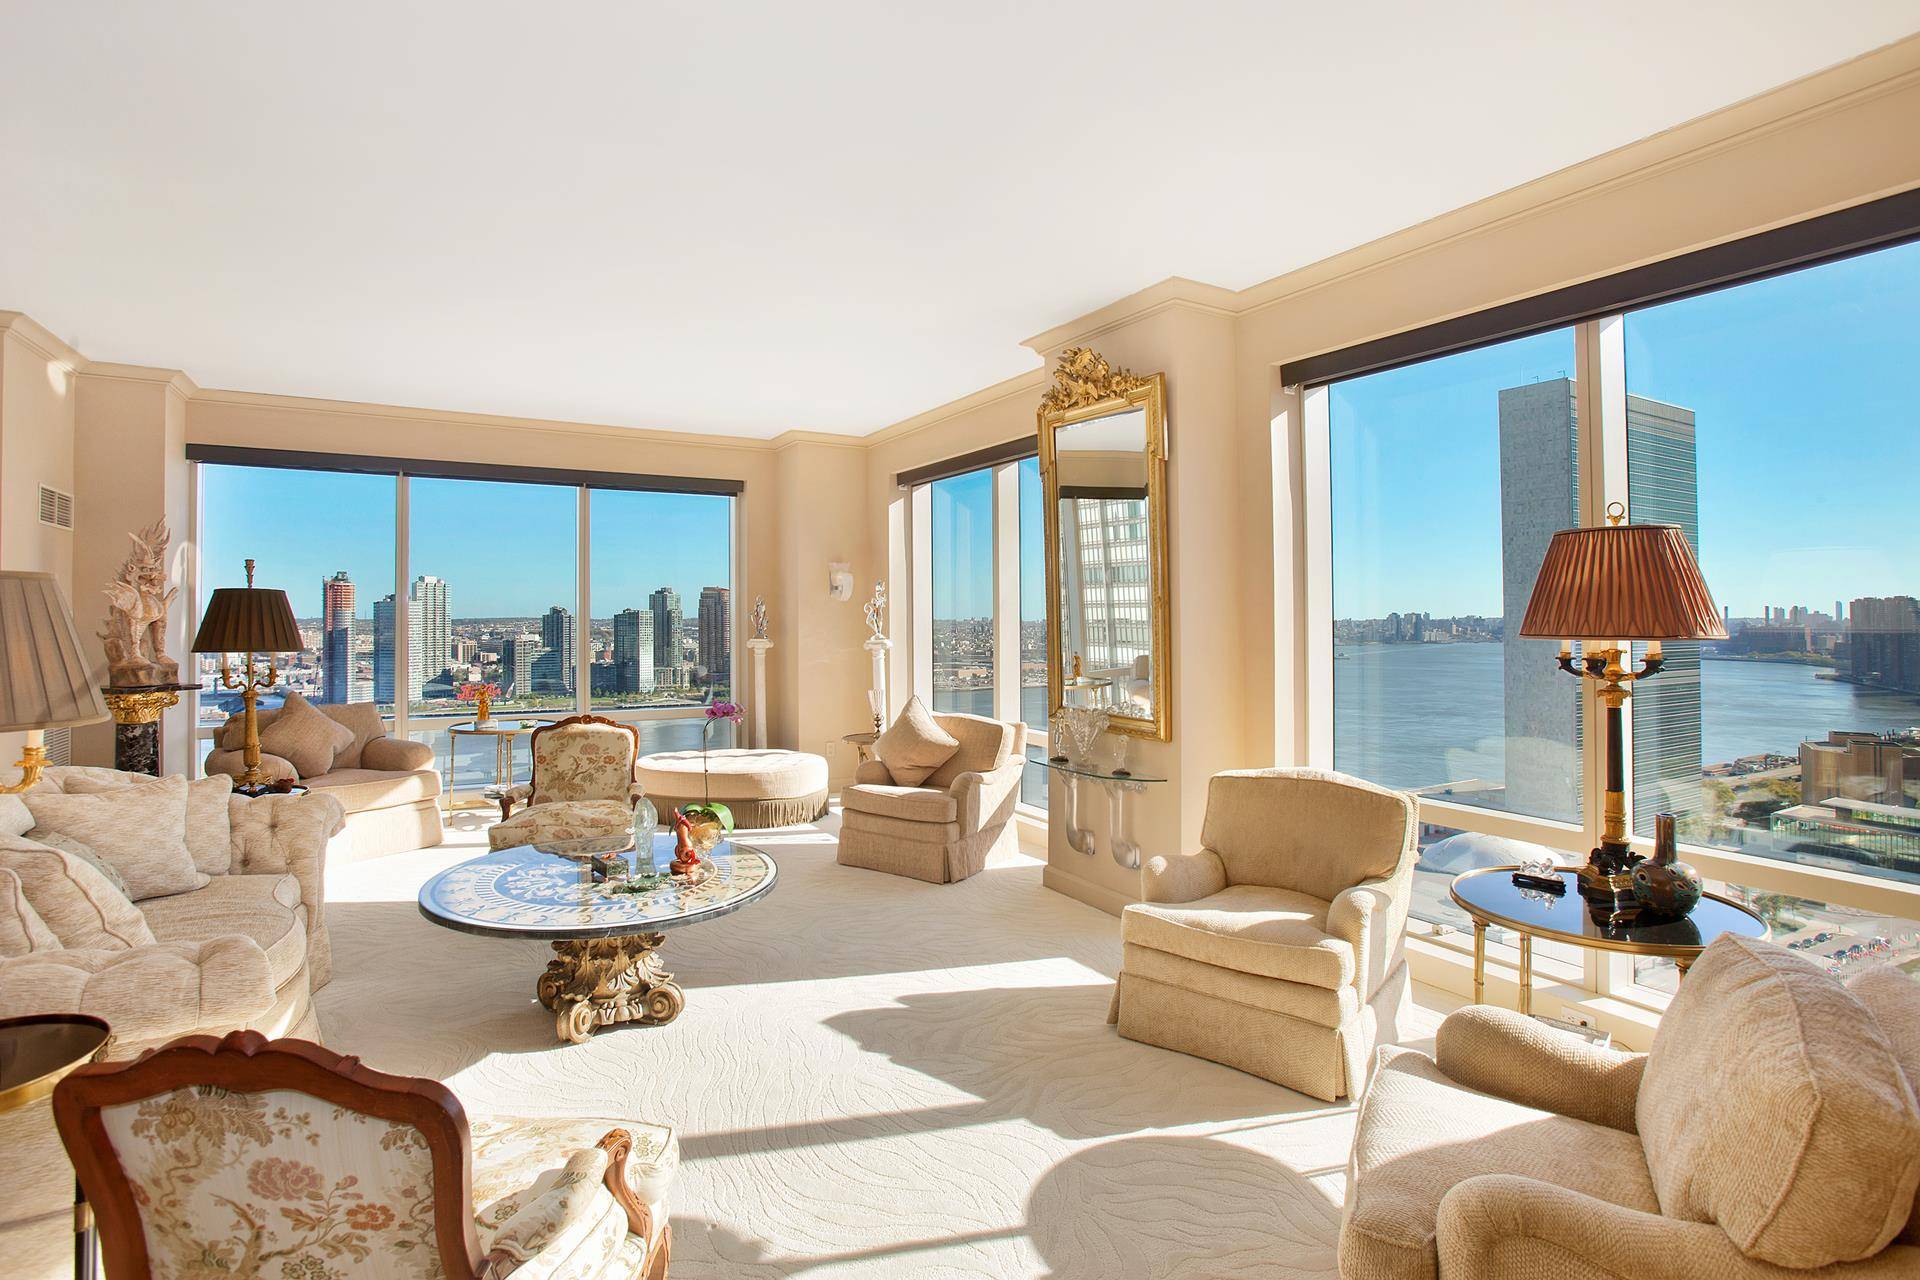 Quintessential Manhattan living is yours in this gorgeous 3 bedroom, 3 bath apartment in one of the most elegant residential towers in the world The Trump World Tower rising high ...